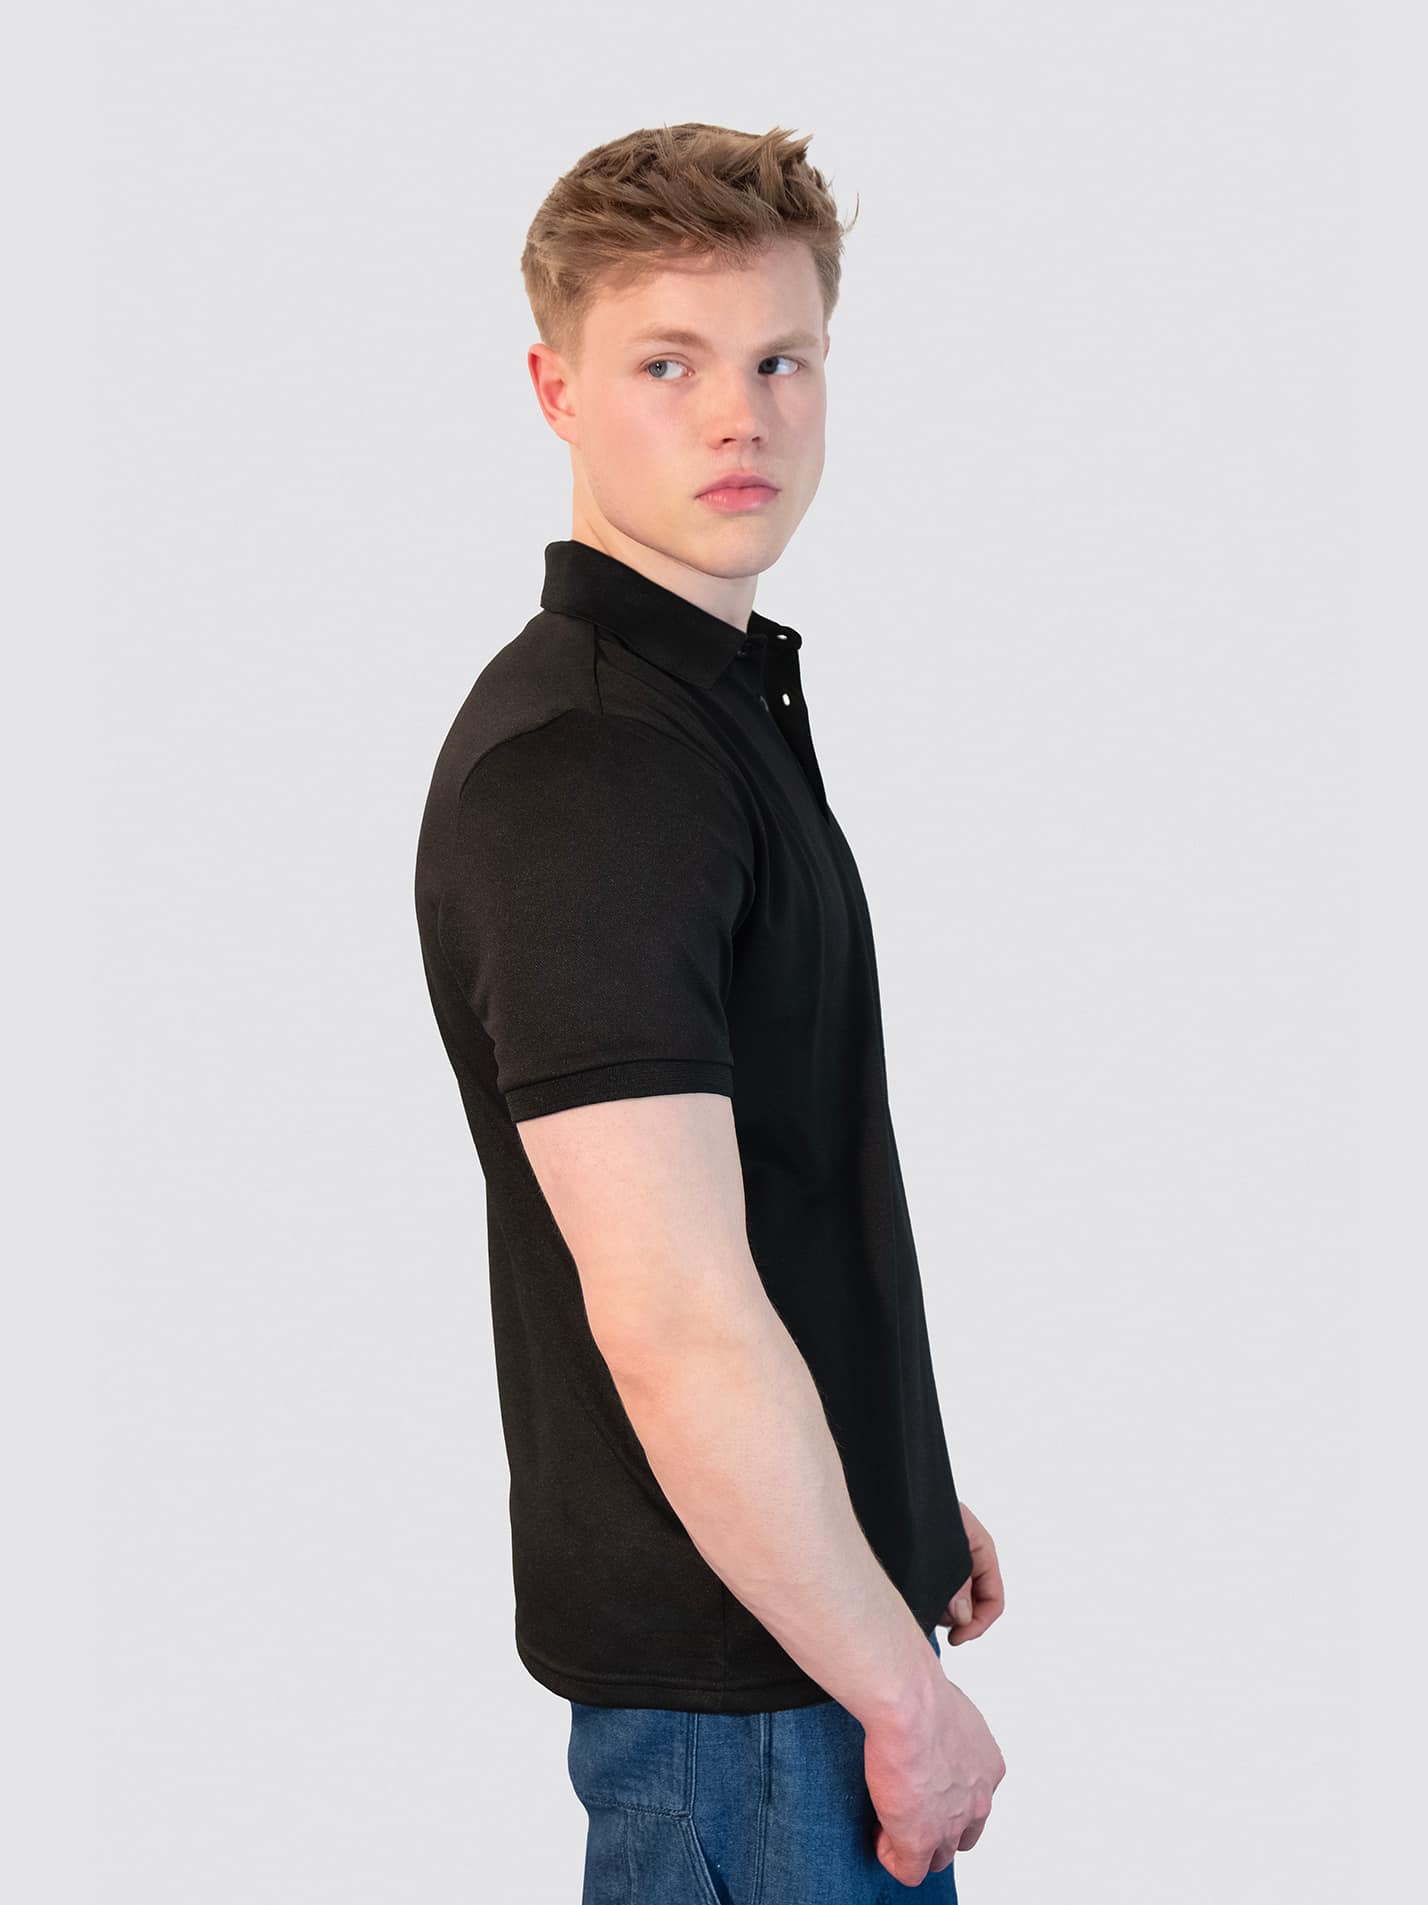 St Chad's College Durham MCR Sustainable Men's Polo Shirt